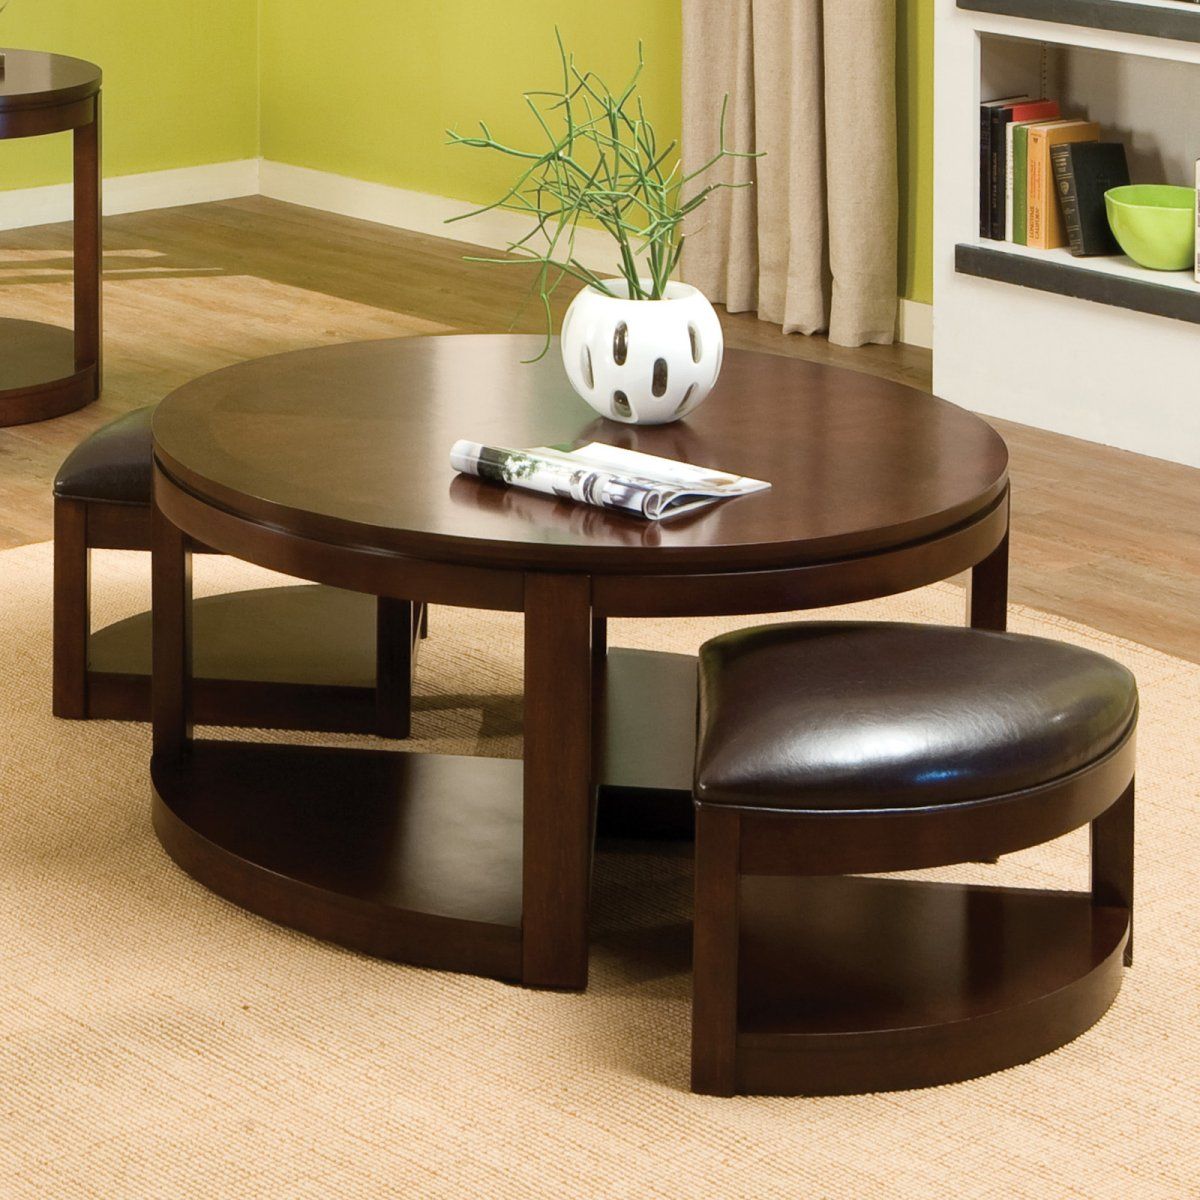 The Round Coffee Tables With Storage – The Simple And Compact Furniture With Regard To Round Coffee Tables With Storage (Photo 6 of 15)